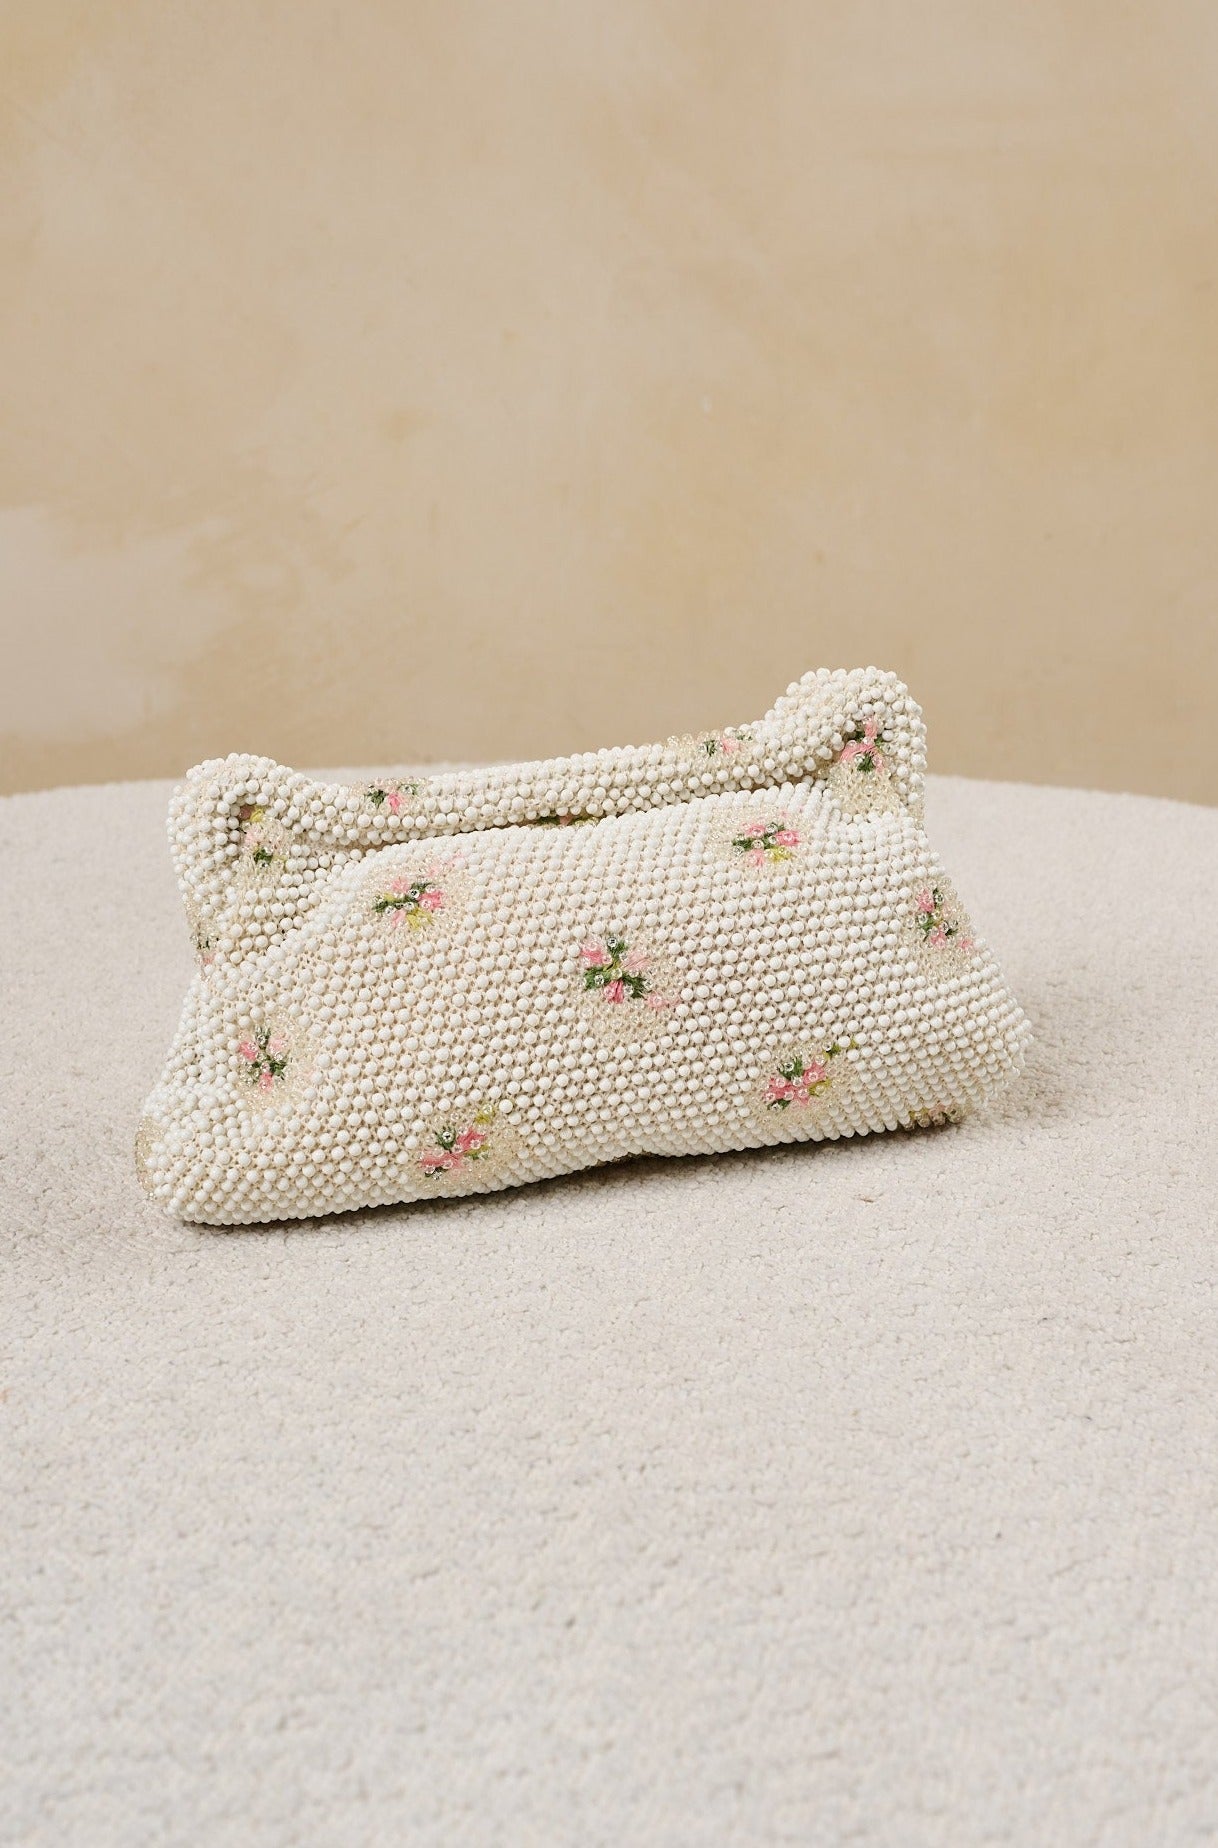 Vintage Beaded Floral Clutch by The Fitzroy - RENTAL